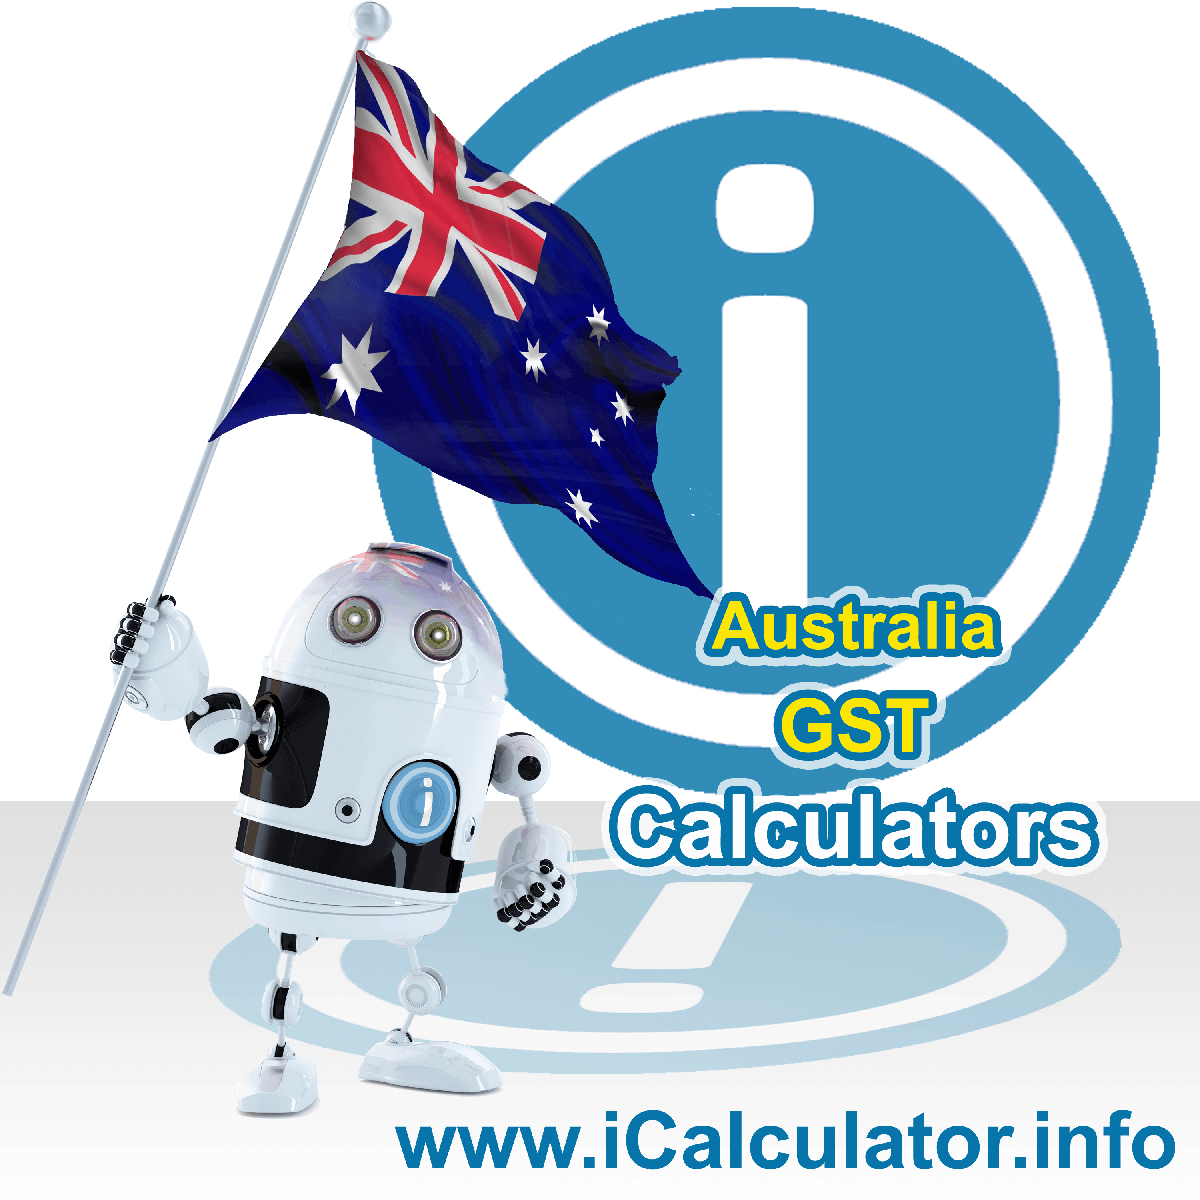 Australia GST Calculator. This image shows the Australia flag and information relating to the GST formula used for calculating goods and service Tax in Australia using the Australia GST Calculator in 2023